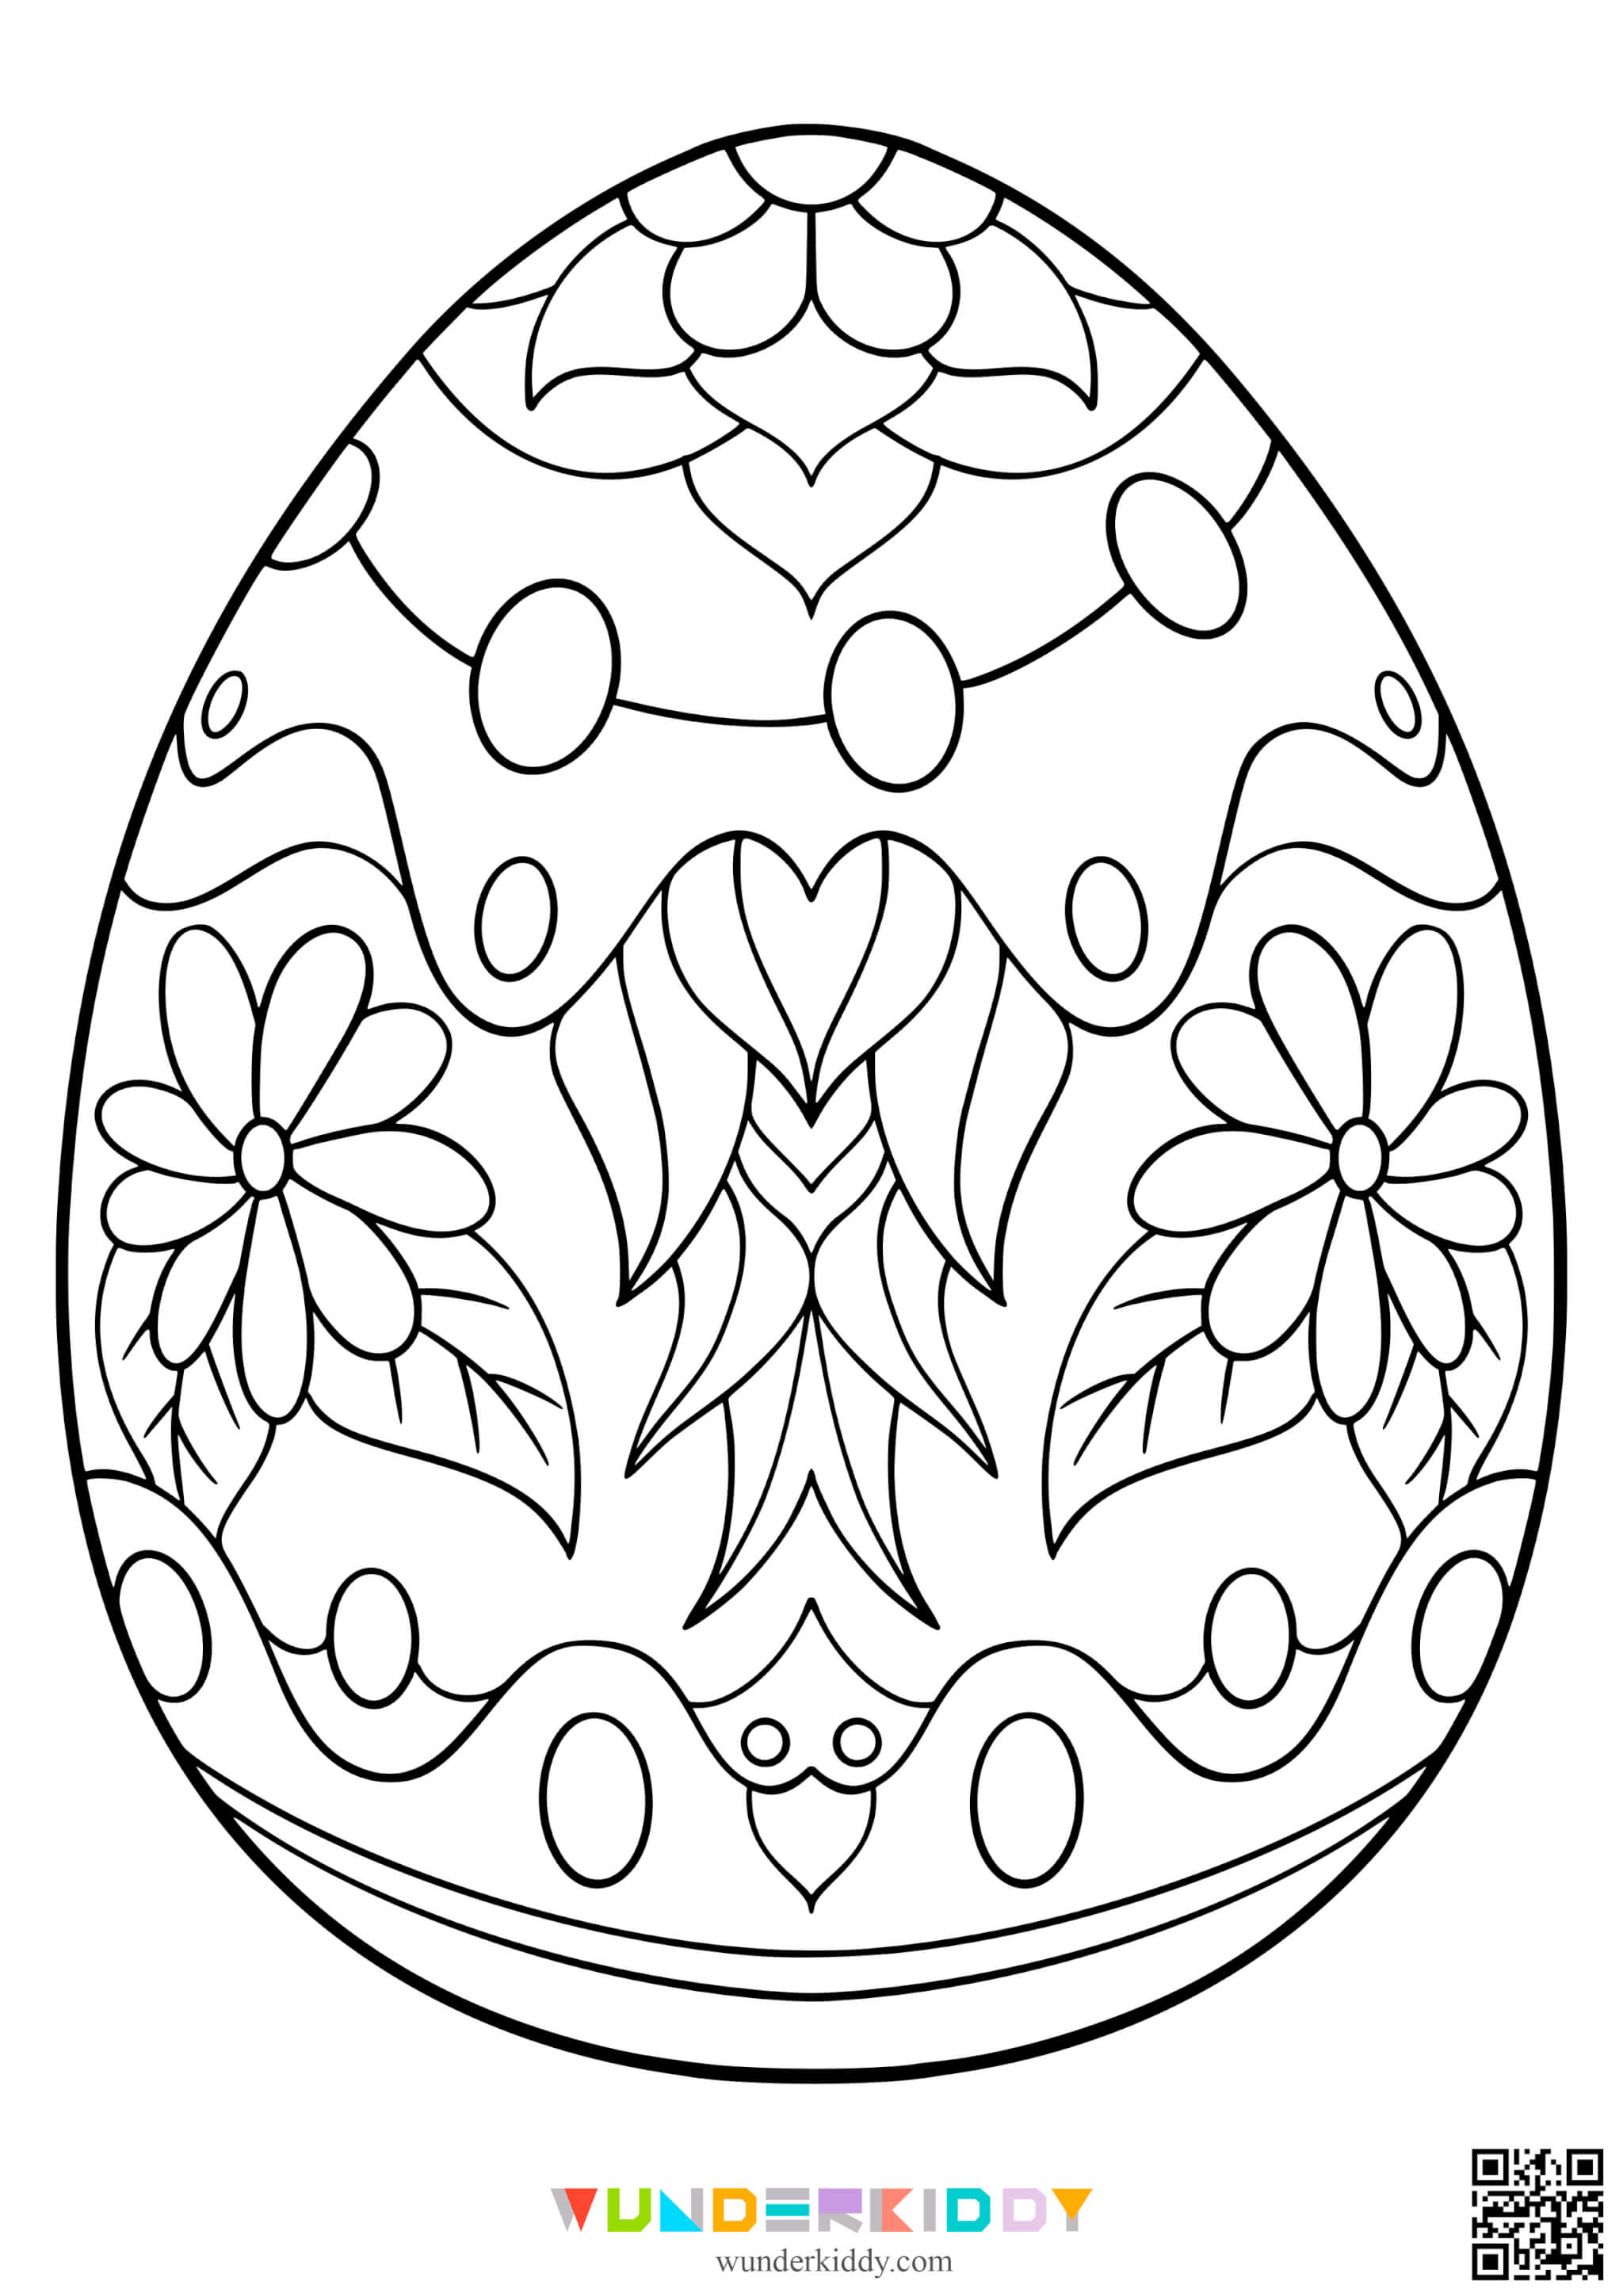 Easter Egg Coloring Pages for Toddlers